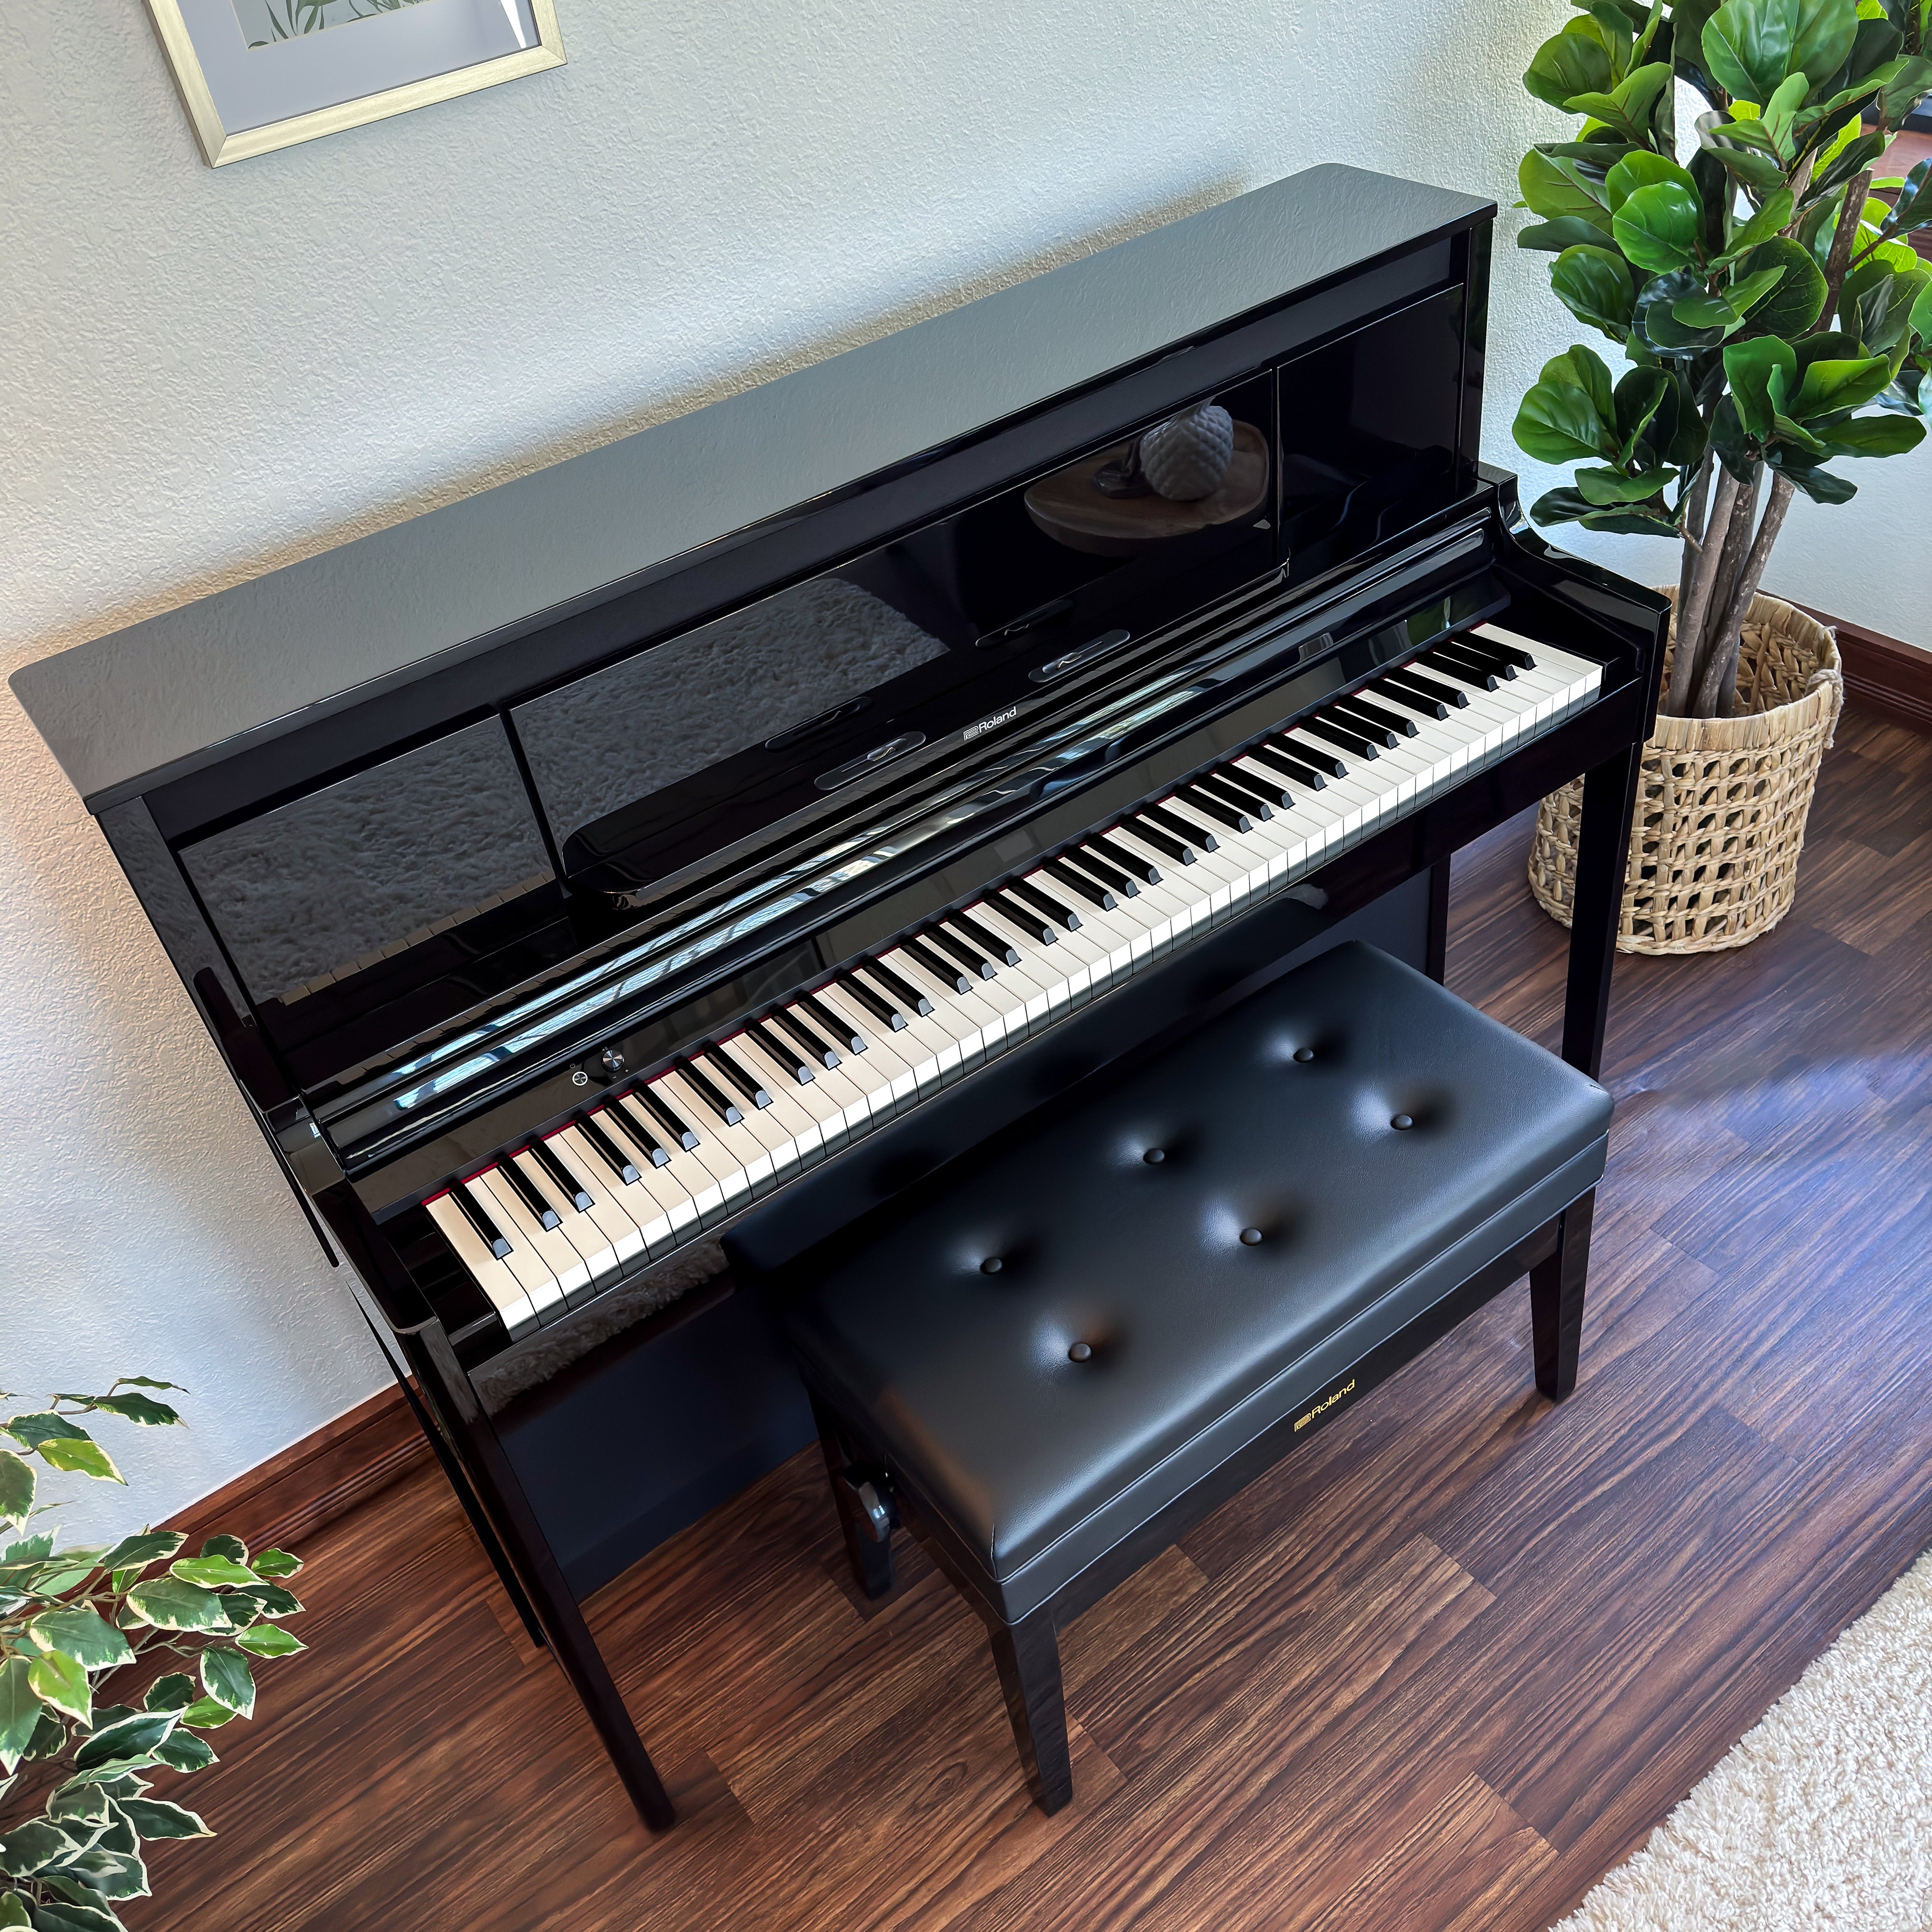 Roland LX-6 Digital Piano with Bench - Polished Ebony - in a stylish living space view 5